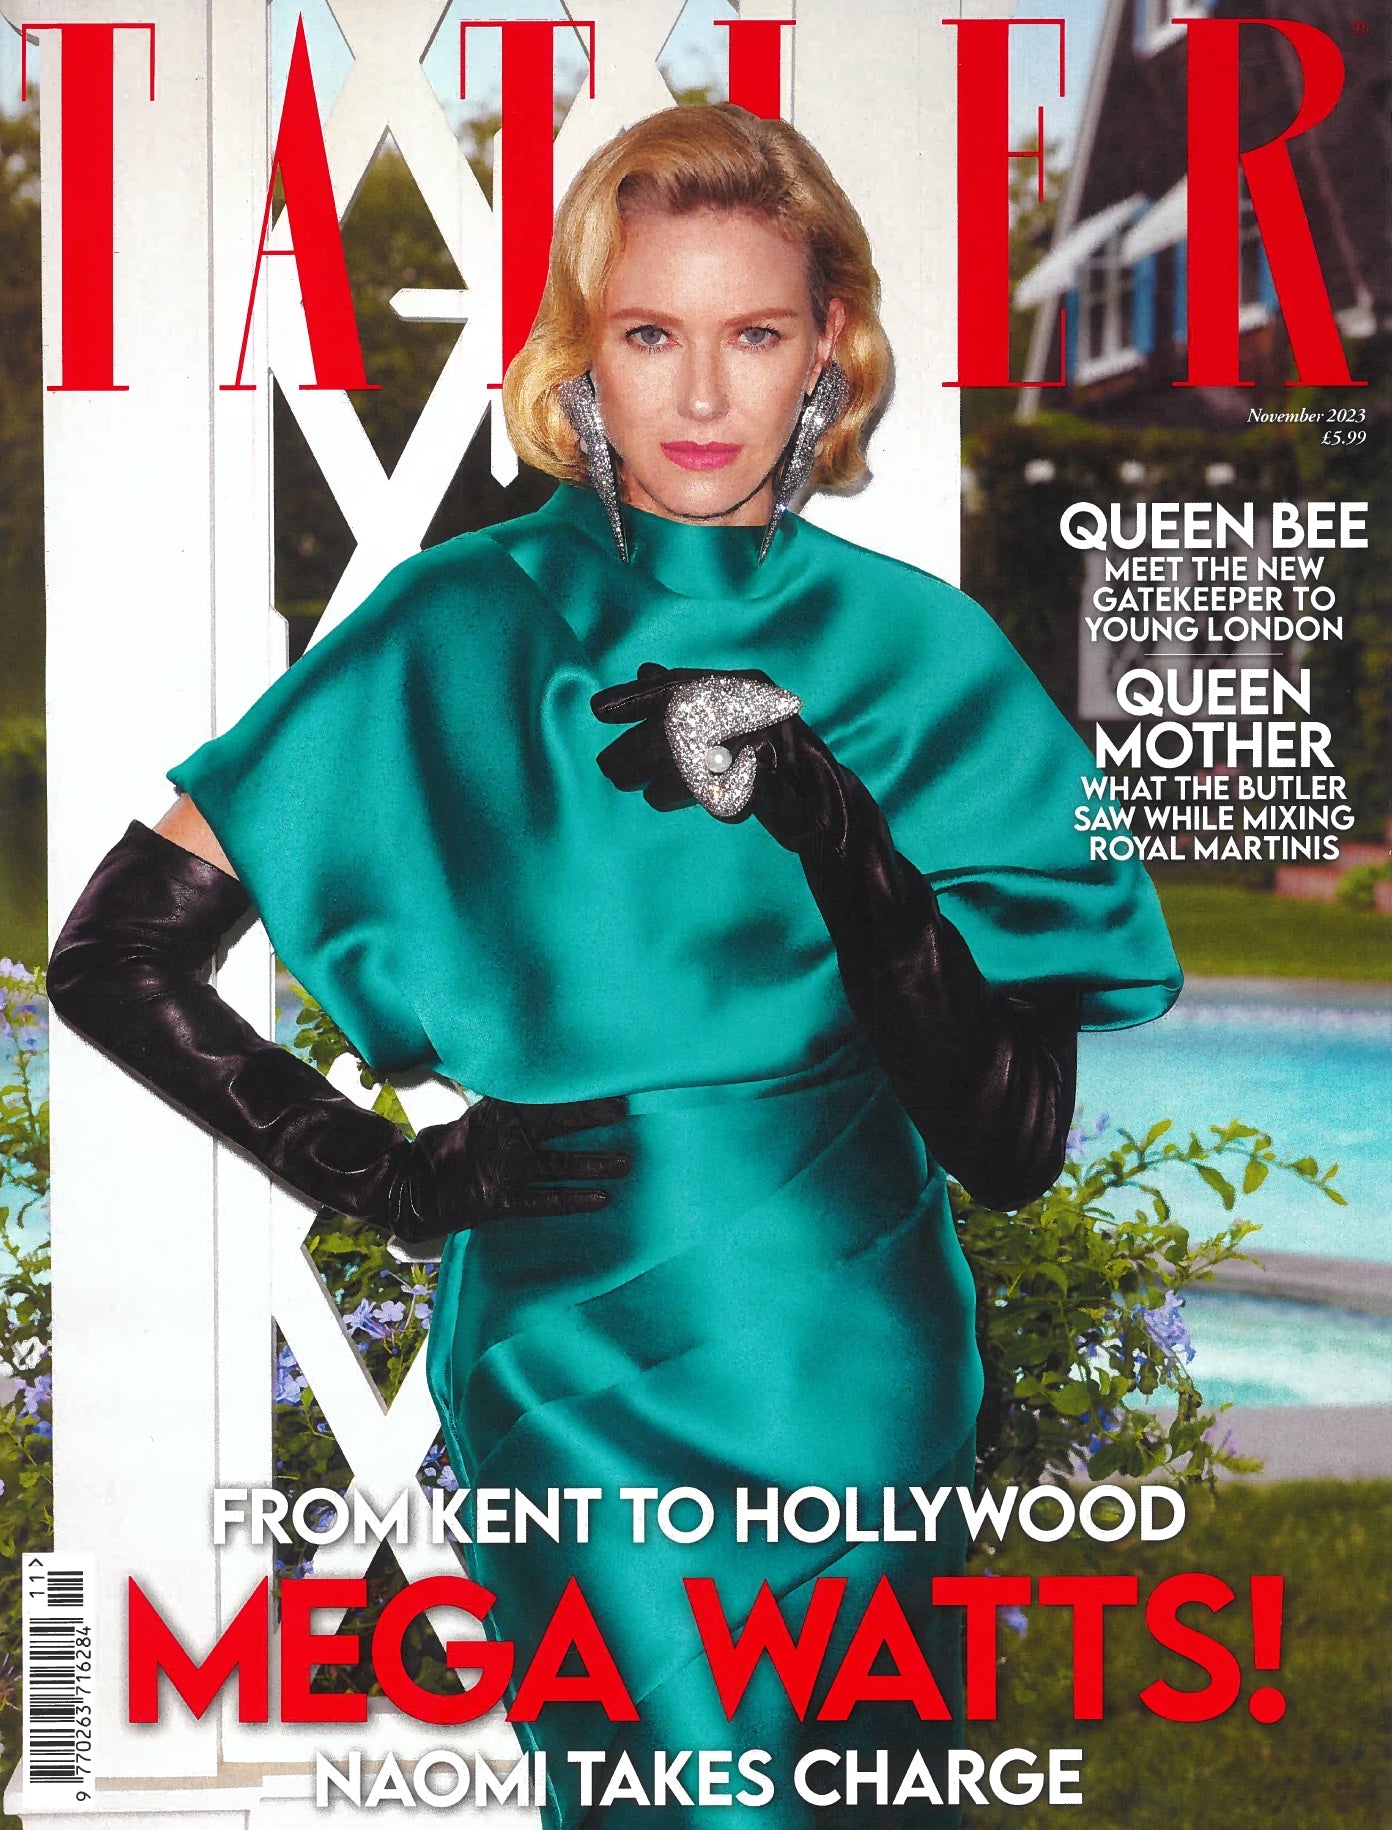 Naomi Watts Shines Bright: Lux Glow Skin Care's Exclusive Feature Inside Tatler's Latest Edition!